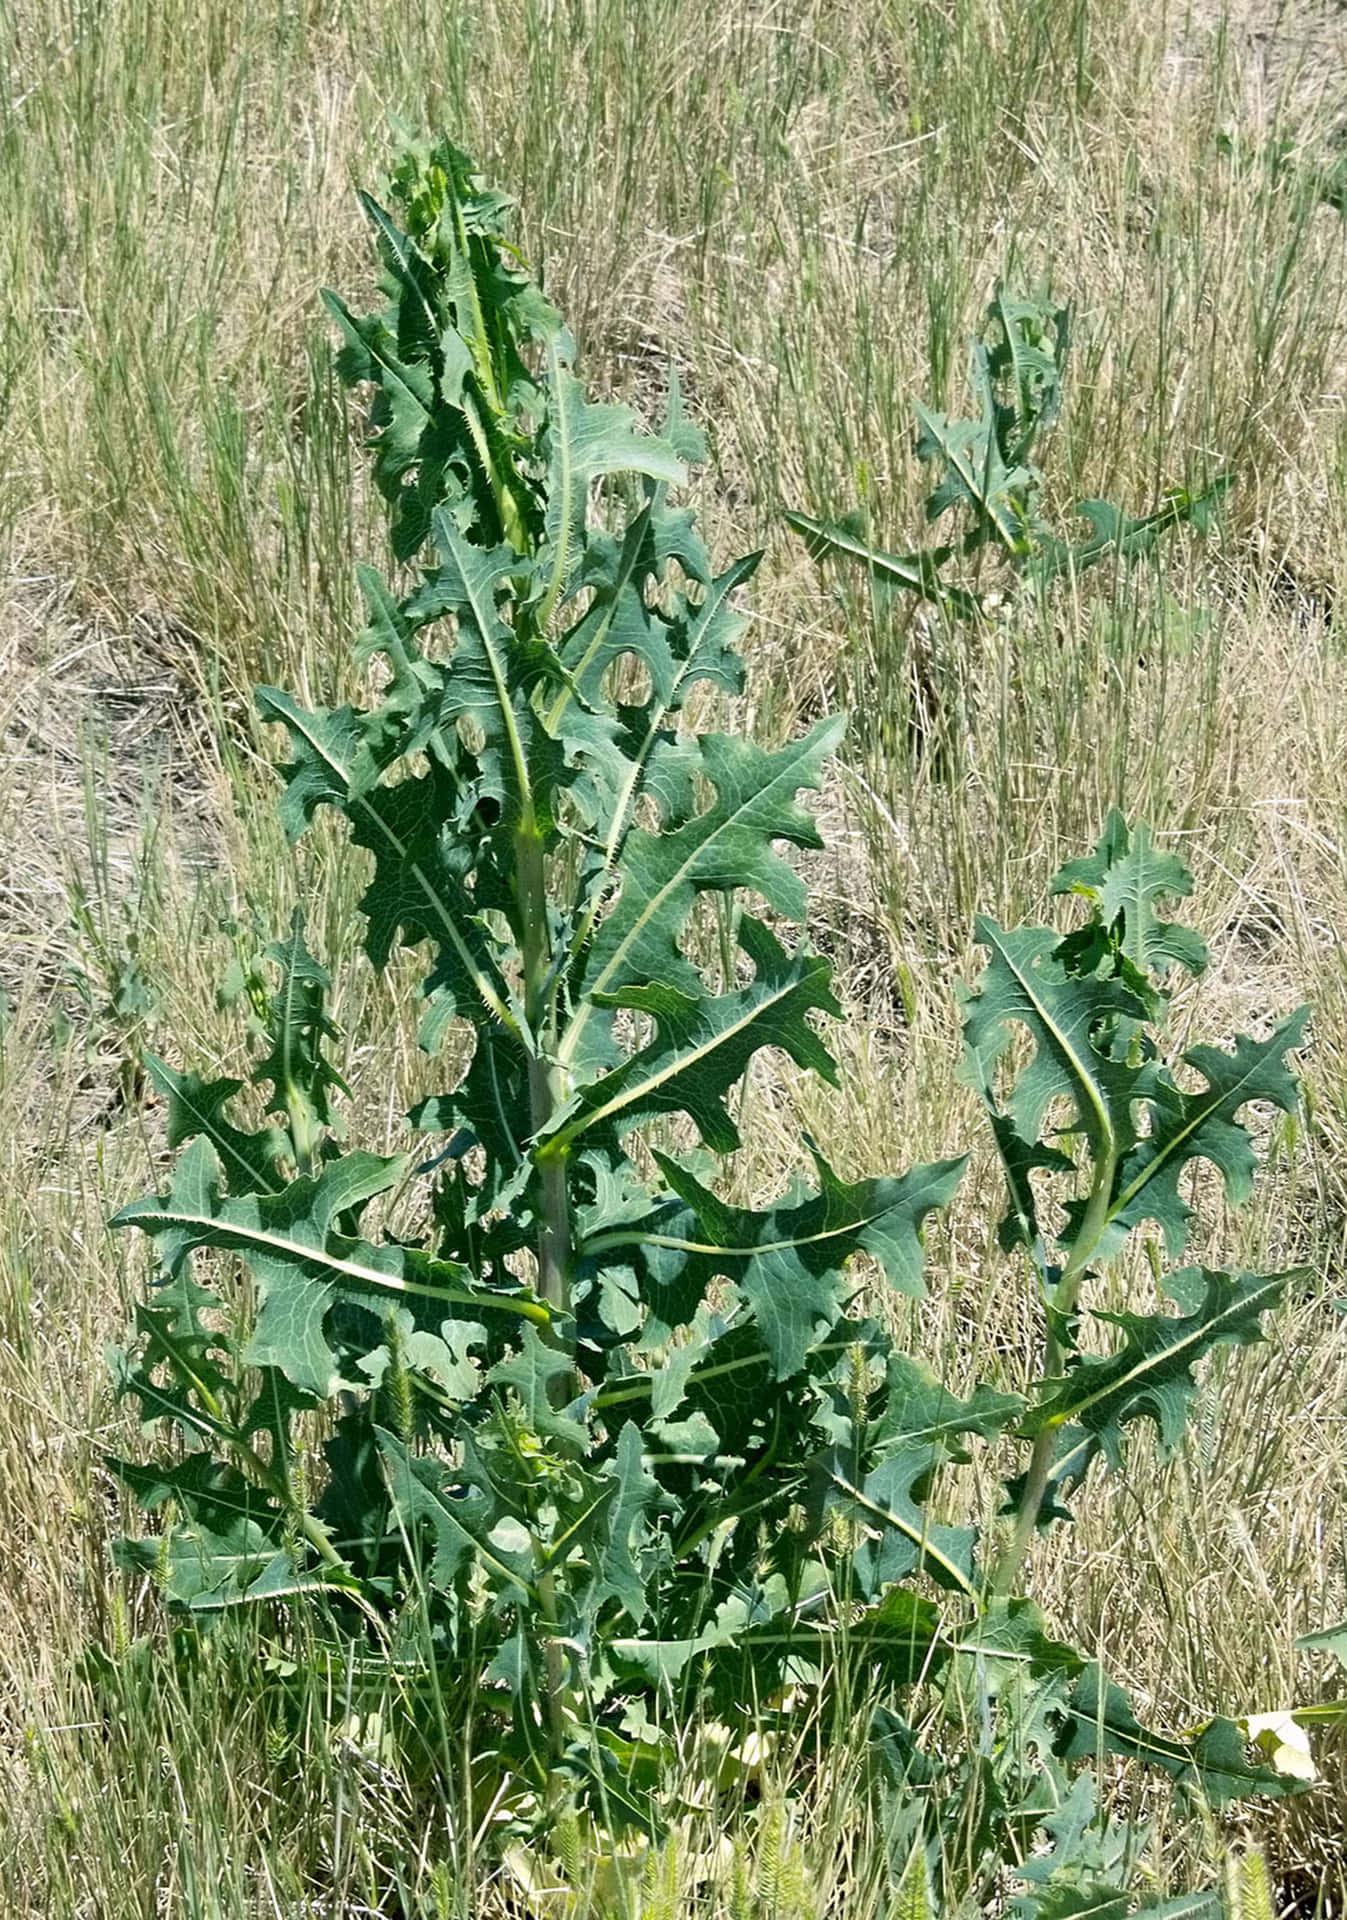 A Plant Growing In A Field With Grass And Weeds